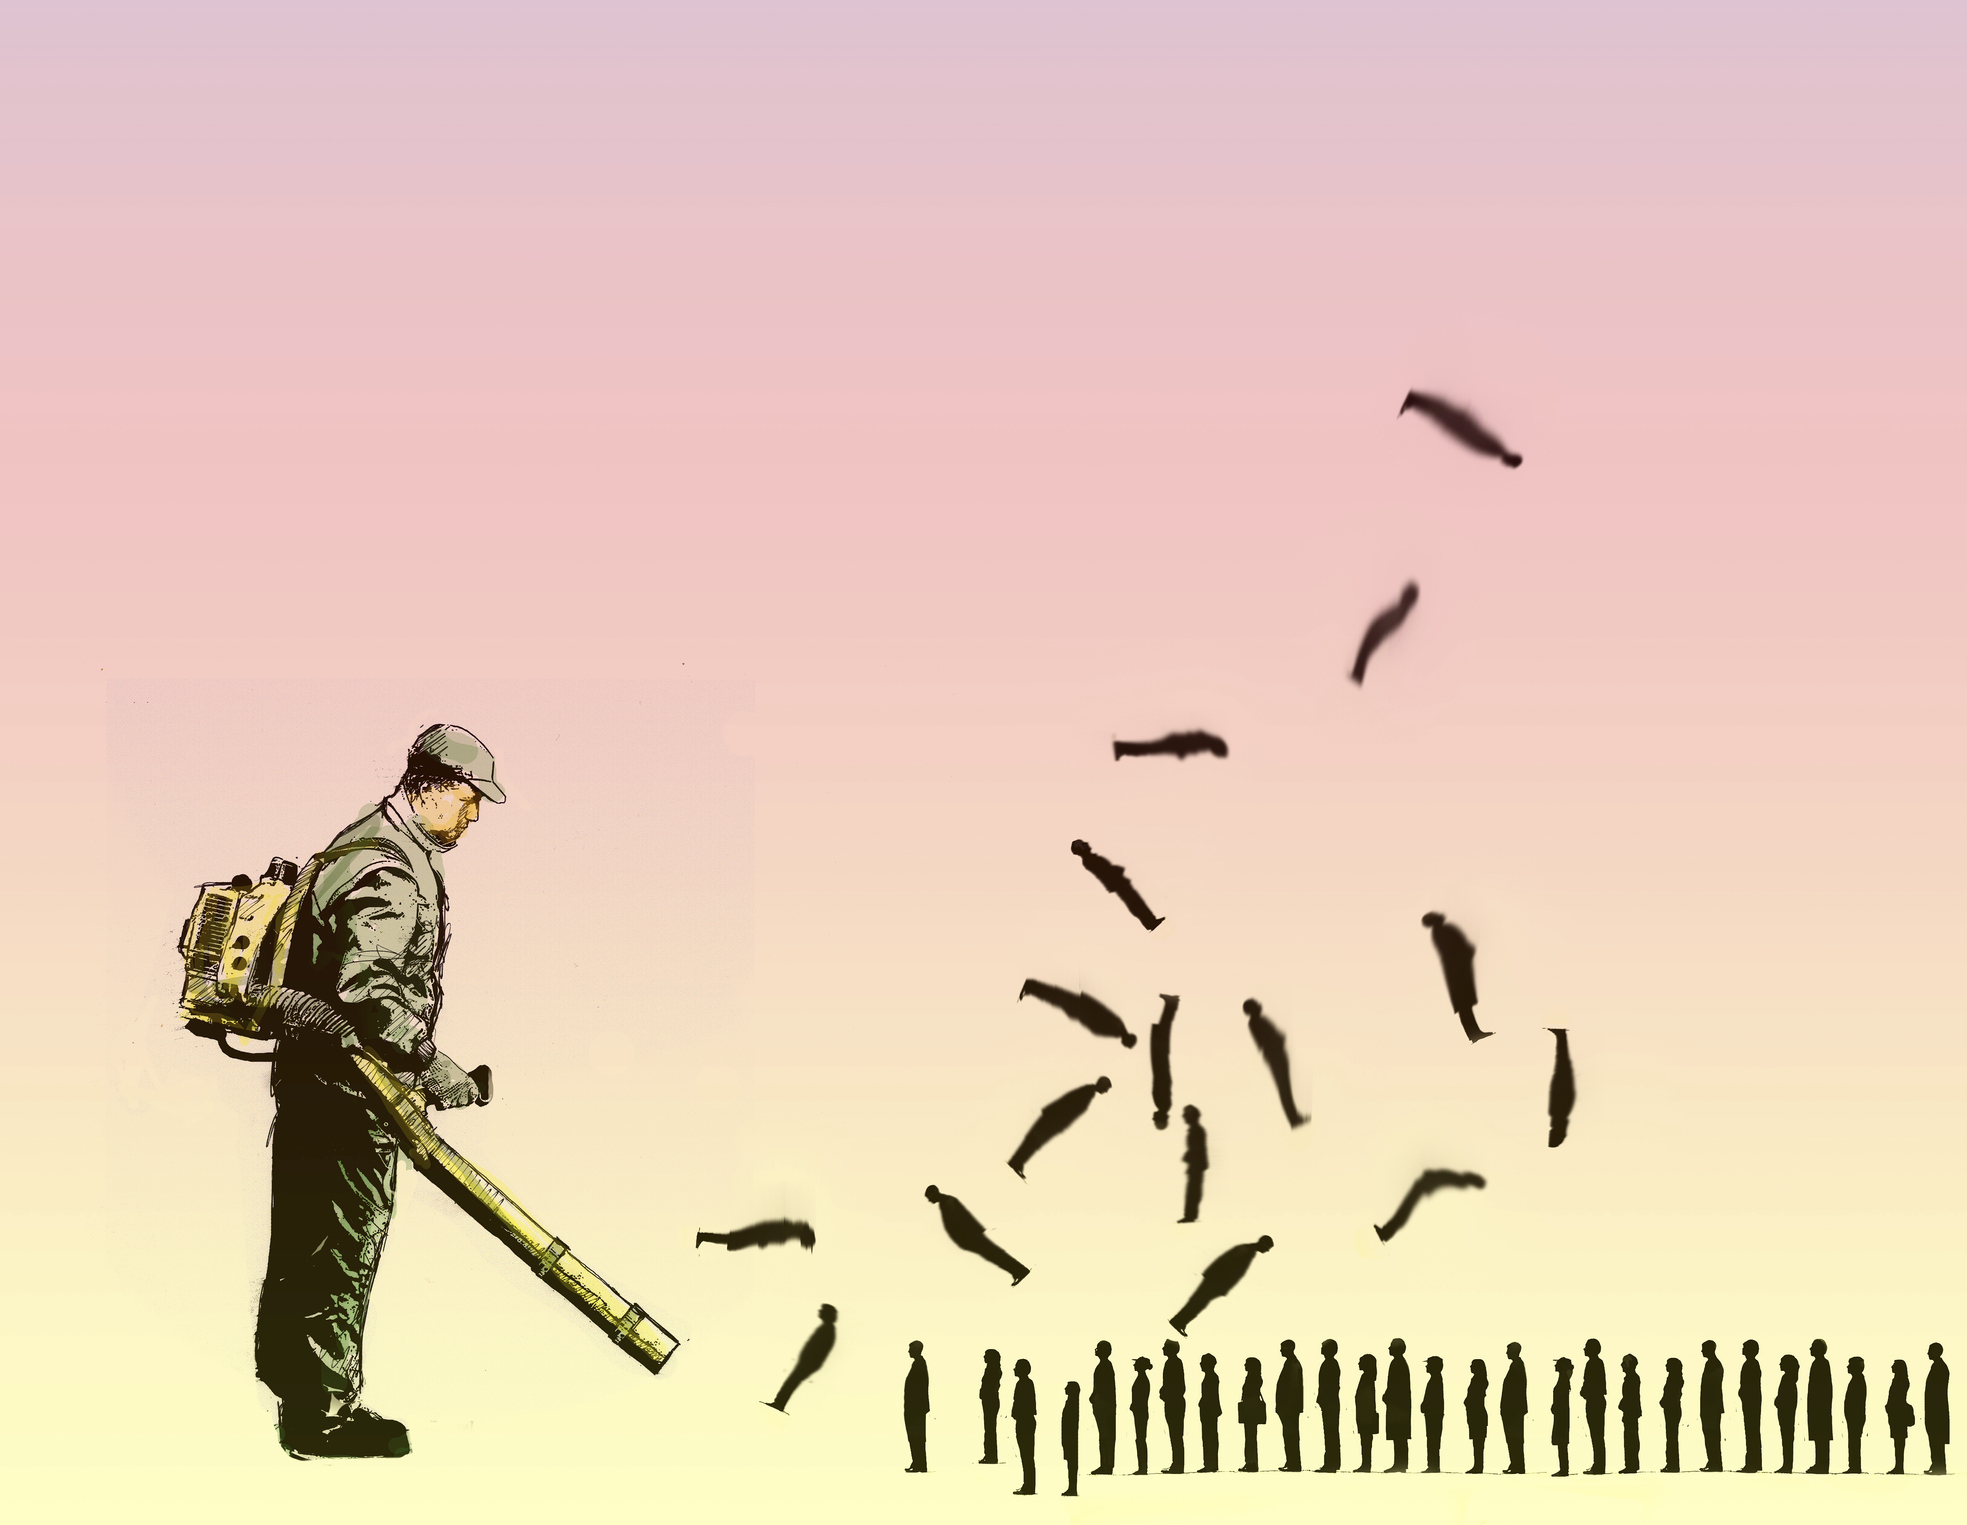 An image of a man with a leaf blower blowing tiny people into the air.